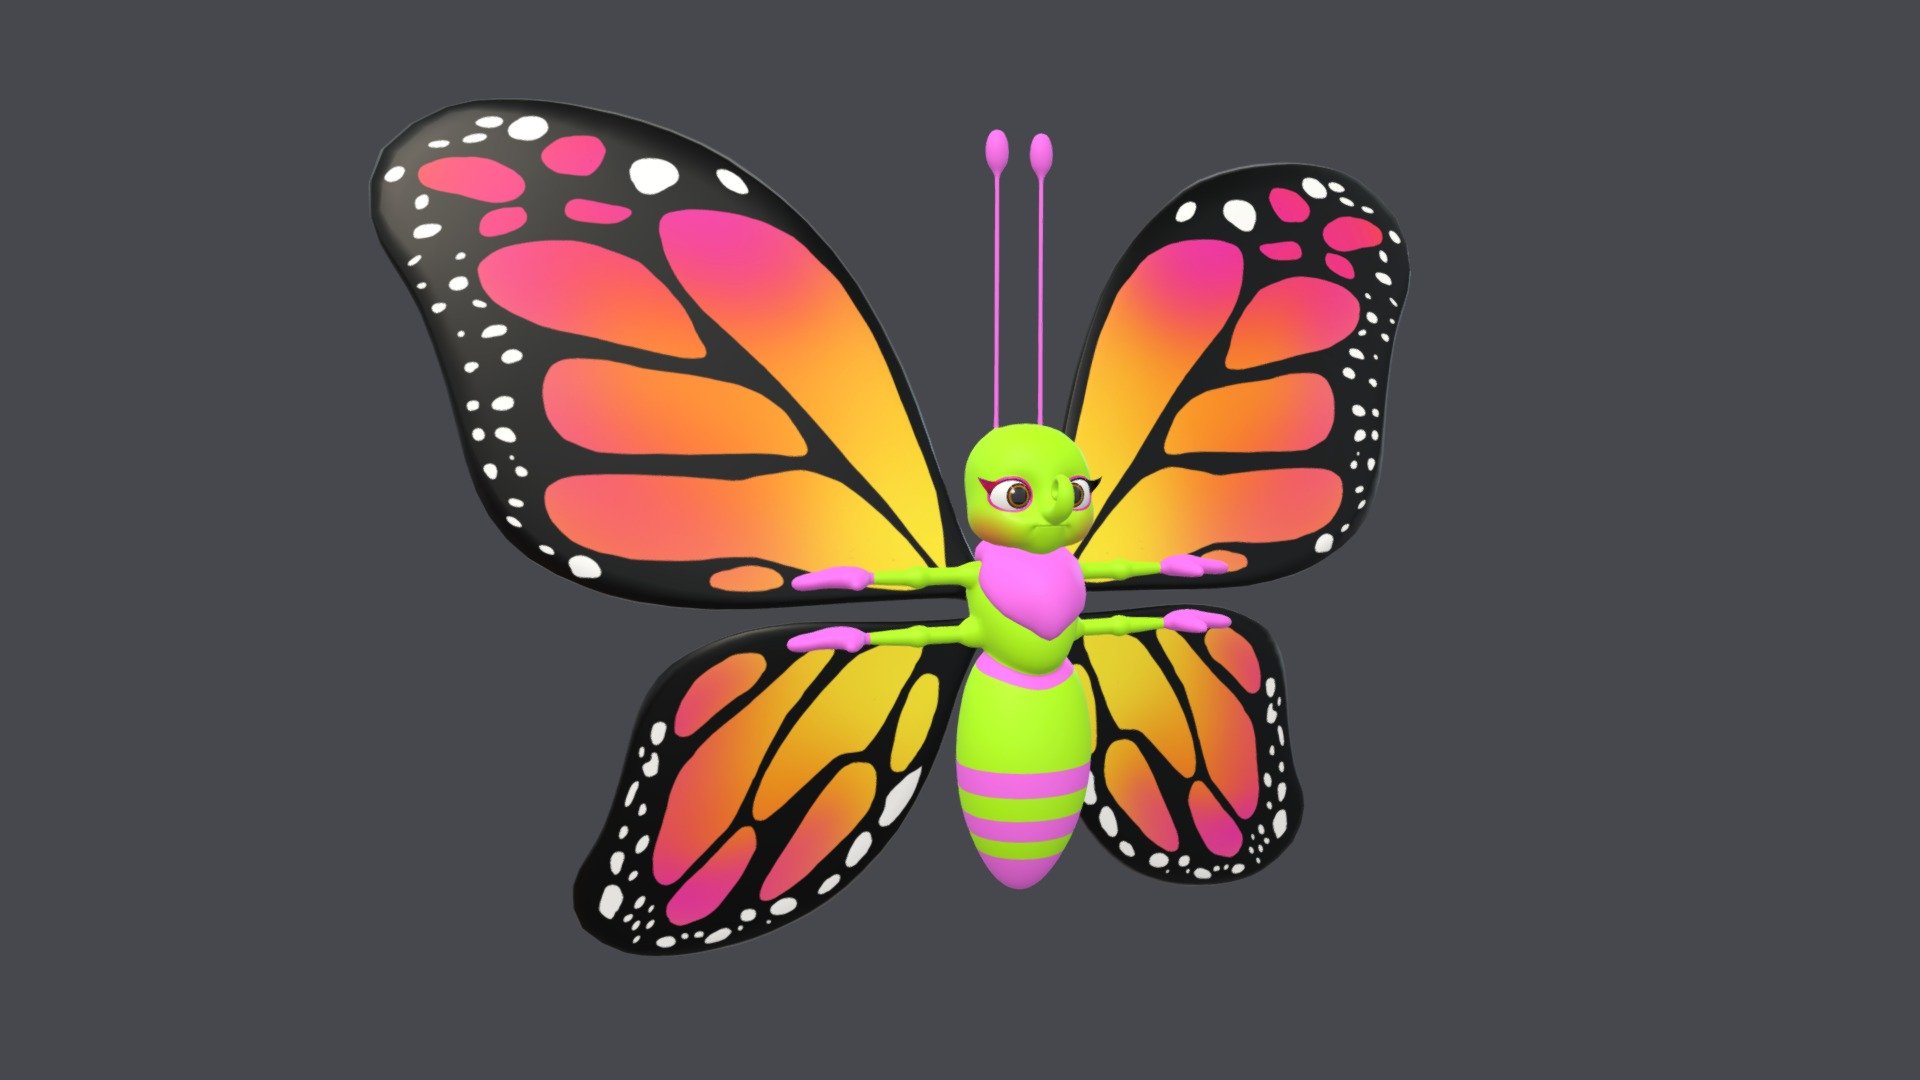 Preview Rig: https://youtu.be/_fxtFcd2rRk

3D Models Butterfly - Hight poly

Polys: 32238 Verts: 25272.

Textures: 03 textures 2048 x 2048

3Ds max file : no rig.

Softimage : no rig.

Maya : have rig.

Model animal animals we designed to be suitable for cartoons.

Thanks for watching - Asset - Cartoons - Character - Butterfly - Rig - Buy Royalty Free 3D model by InCom Studio (@incomstudio) 3d model